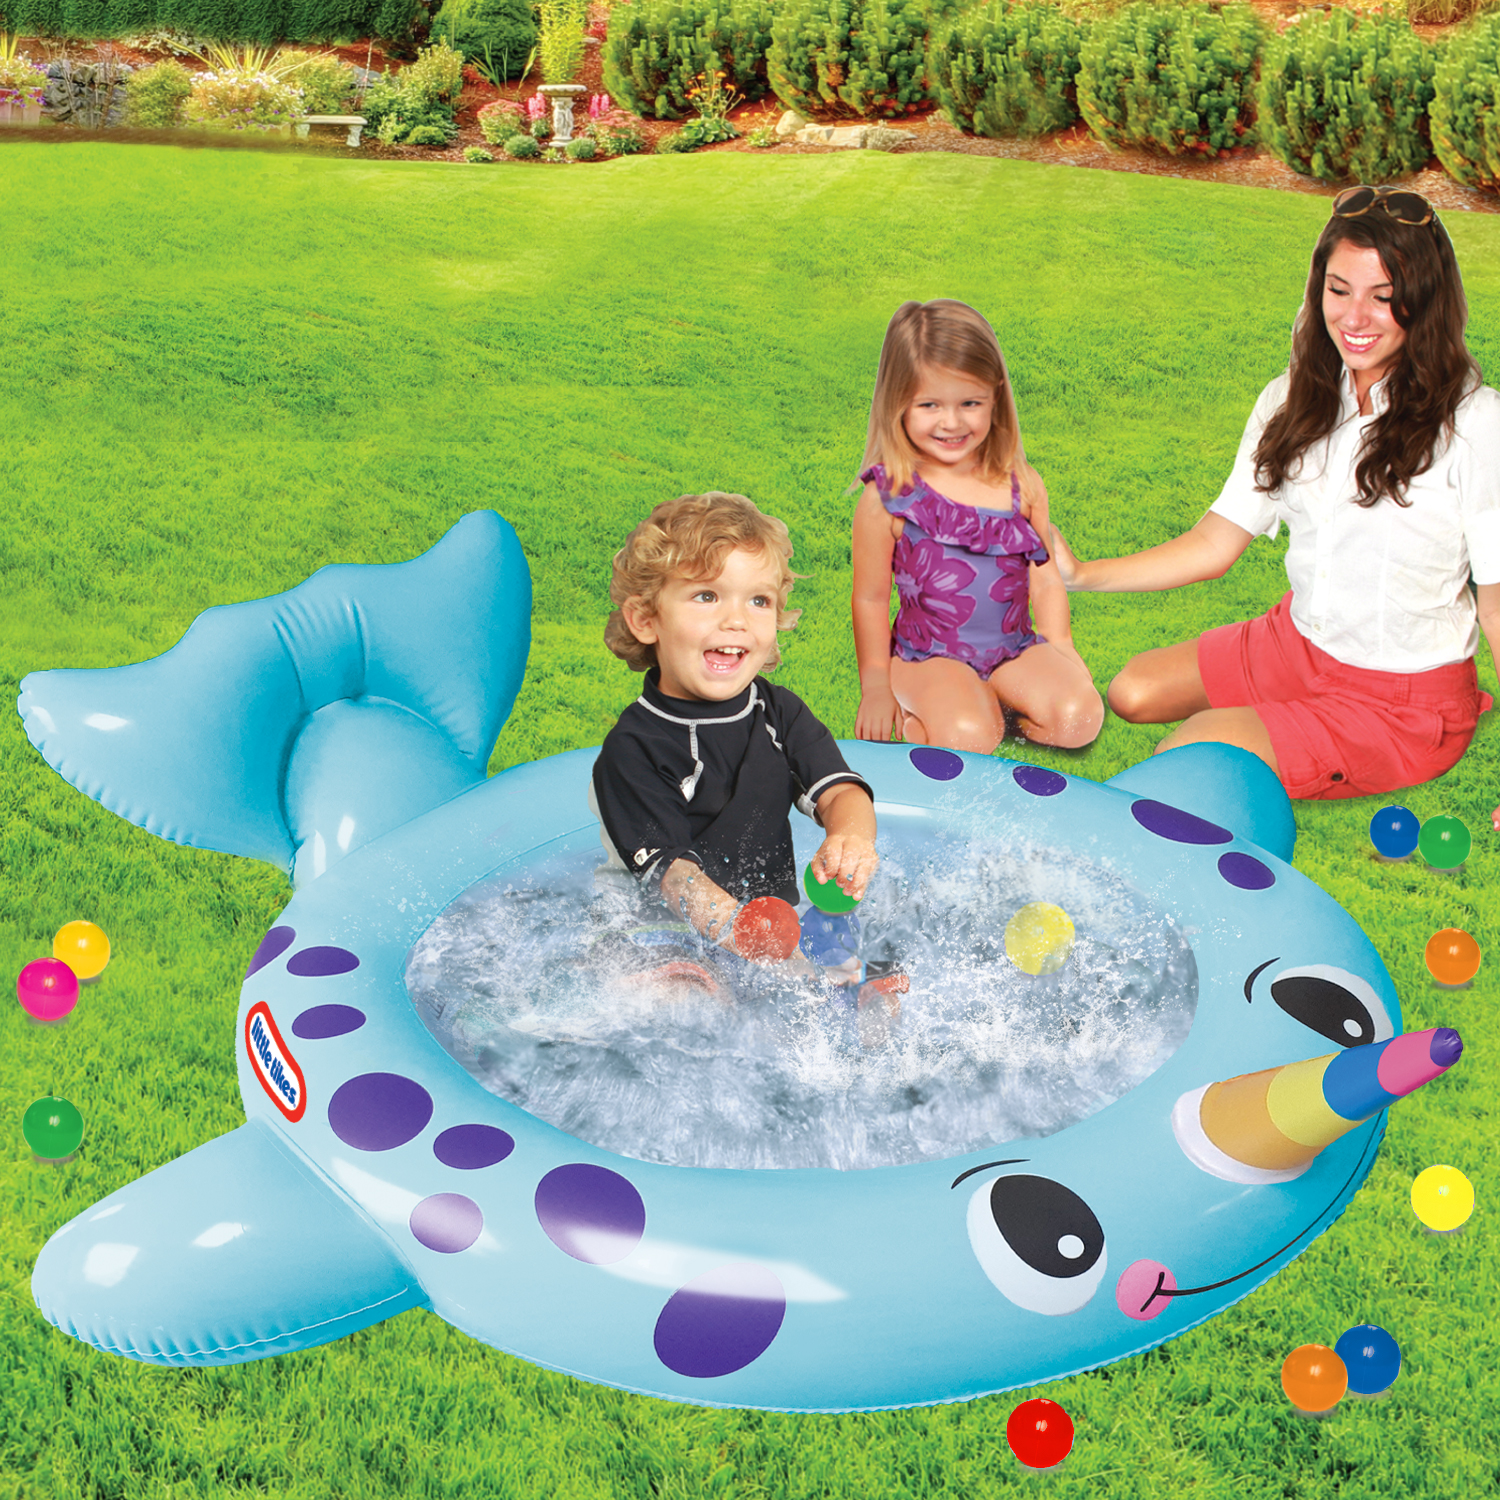 Little Tikes Narwhal 2 in1 Play Center, Ball Pit Round Splash Area, Kids 2-6 Years Old - image 2 of 5